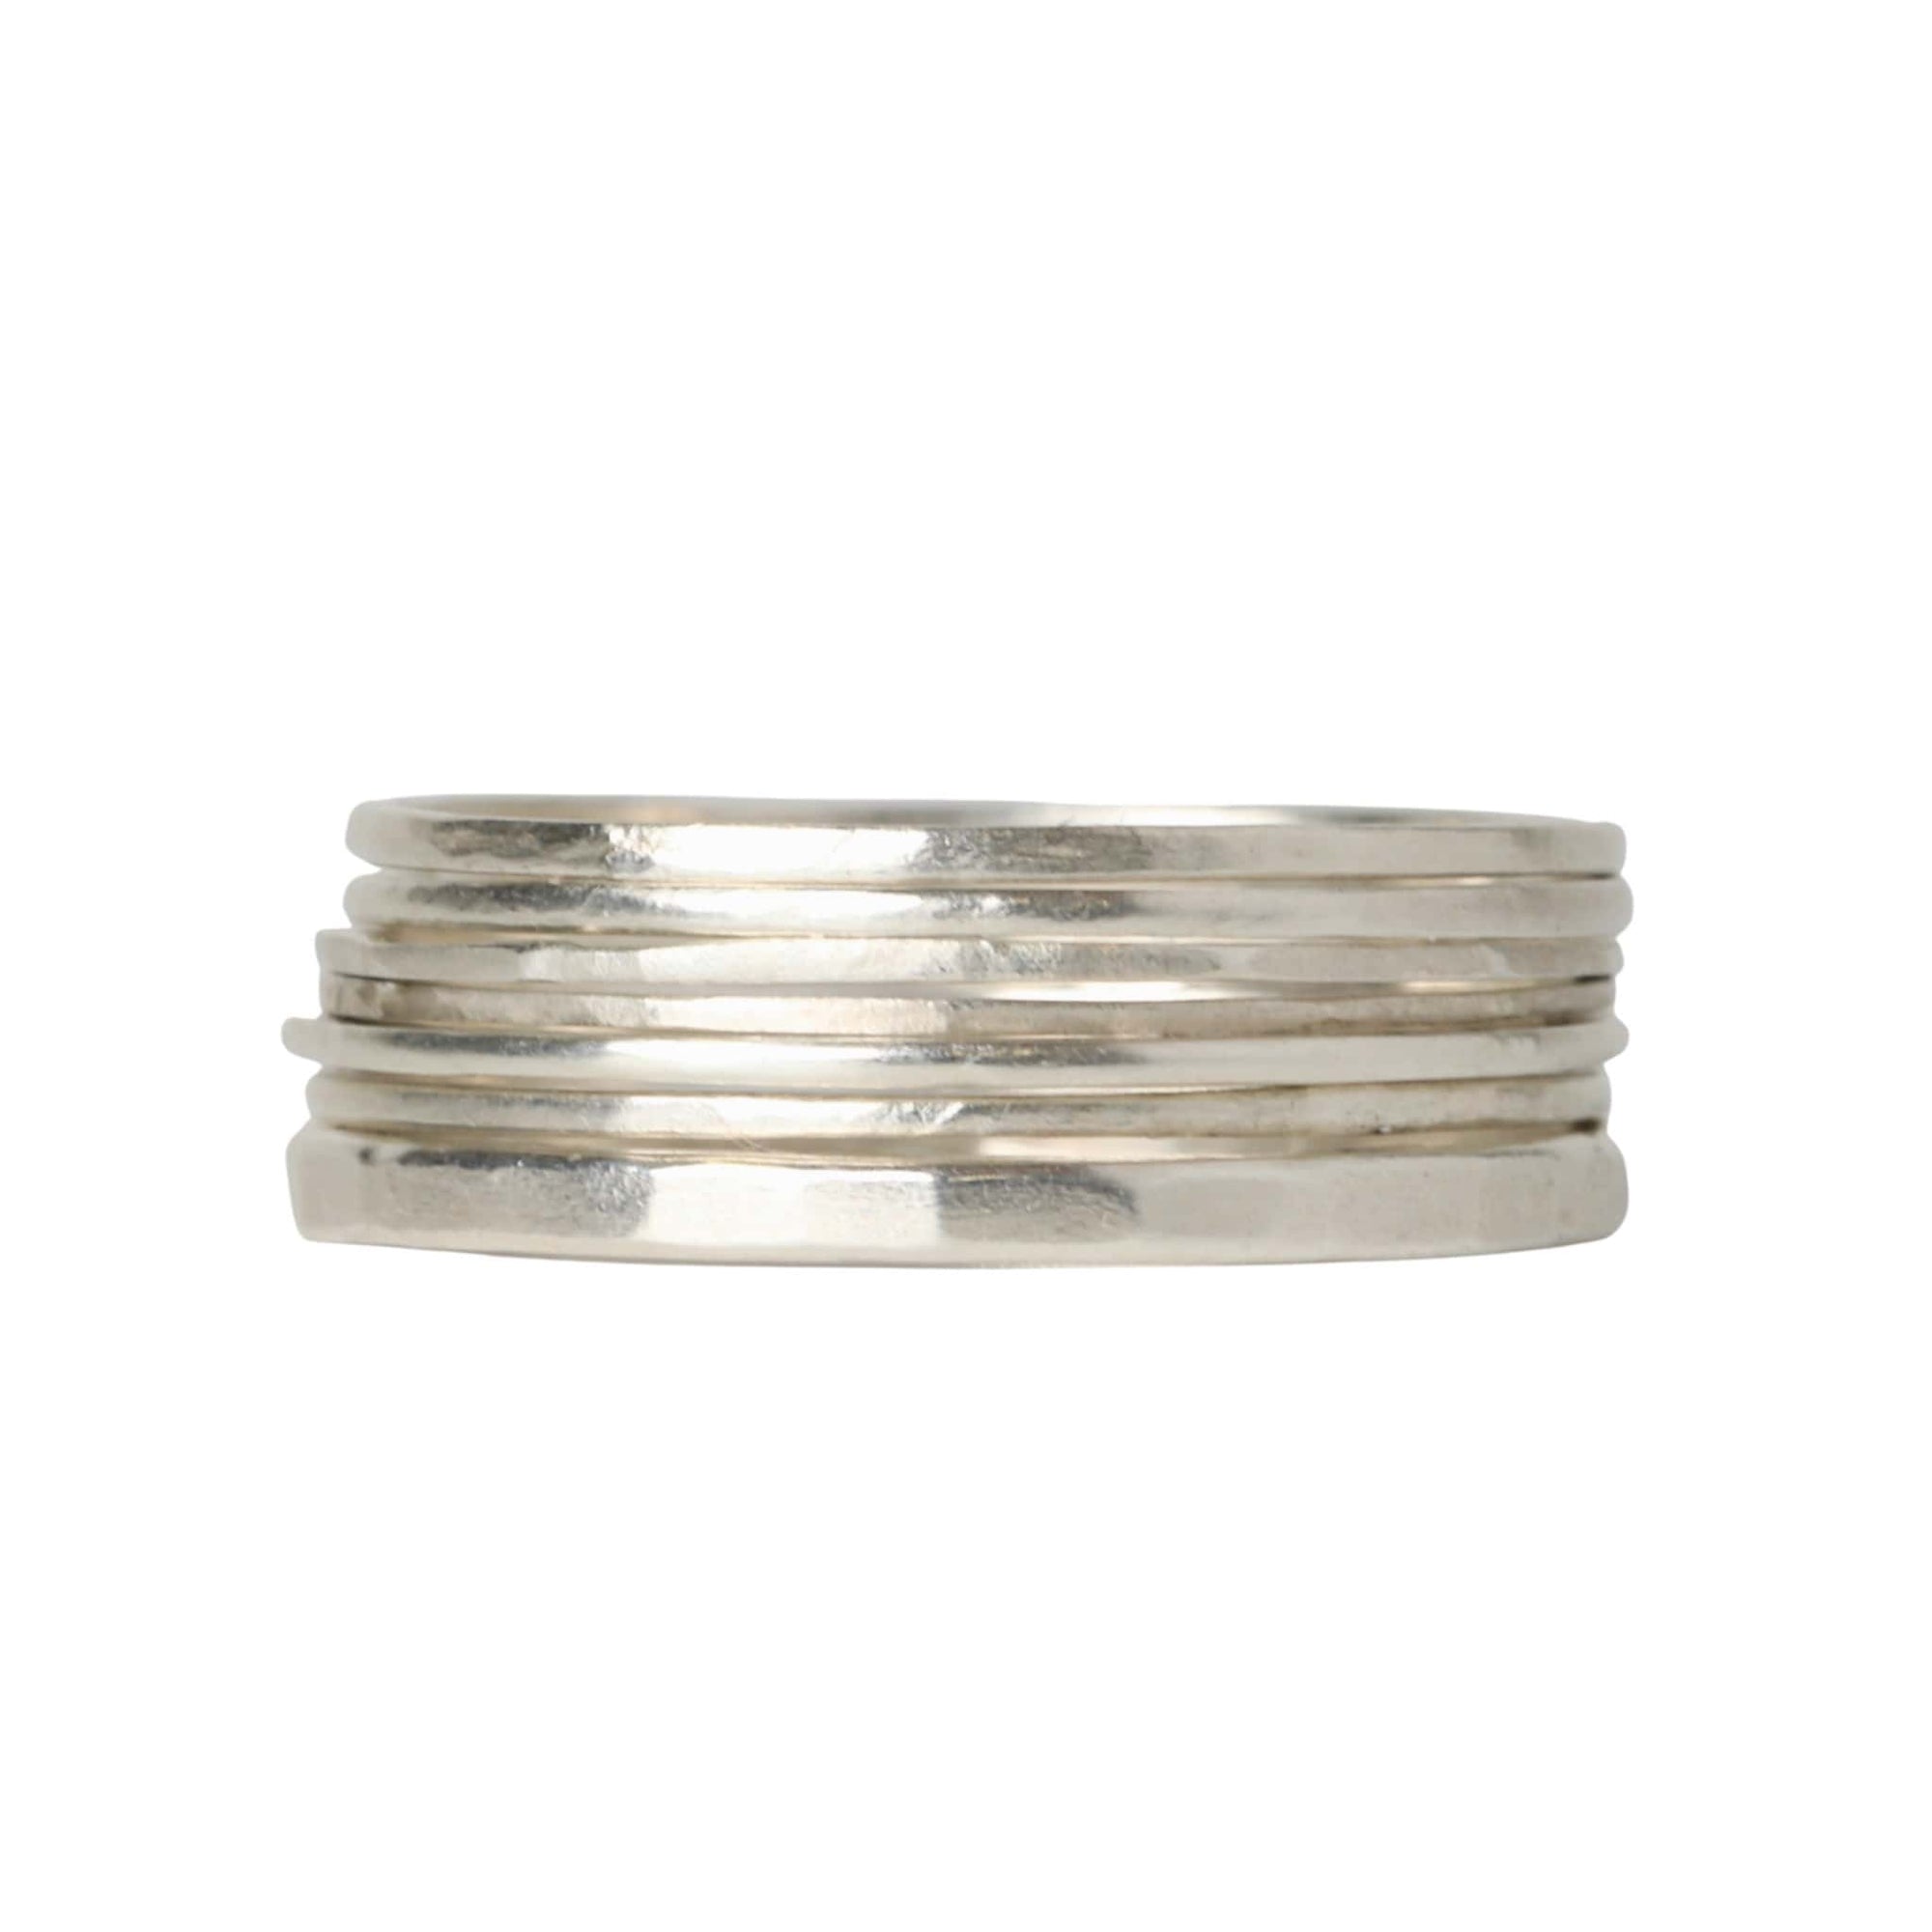 Sarah Macfadden Set of 7 Sterling Silver Hammered Stacking Bands with Varying Thicknesses